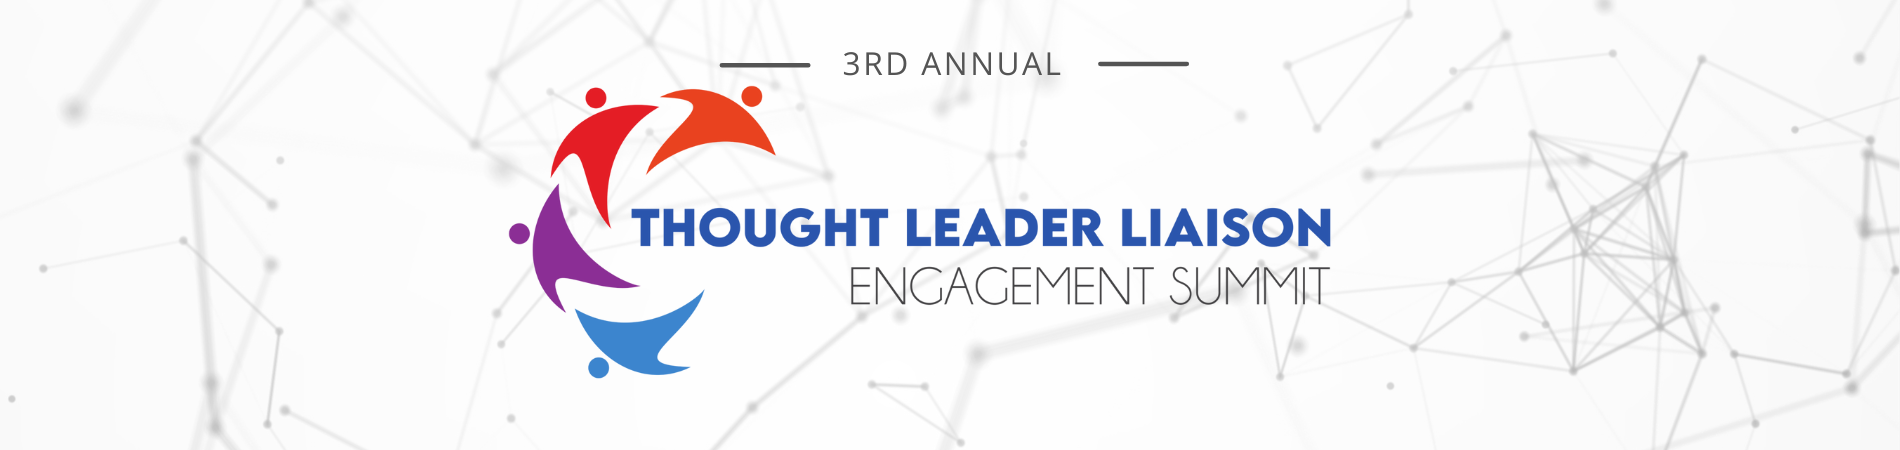 Mobile Banner for 3rd Annual Thought Leader Liaison Engagement Summit